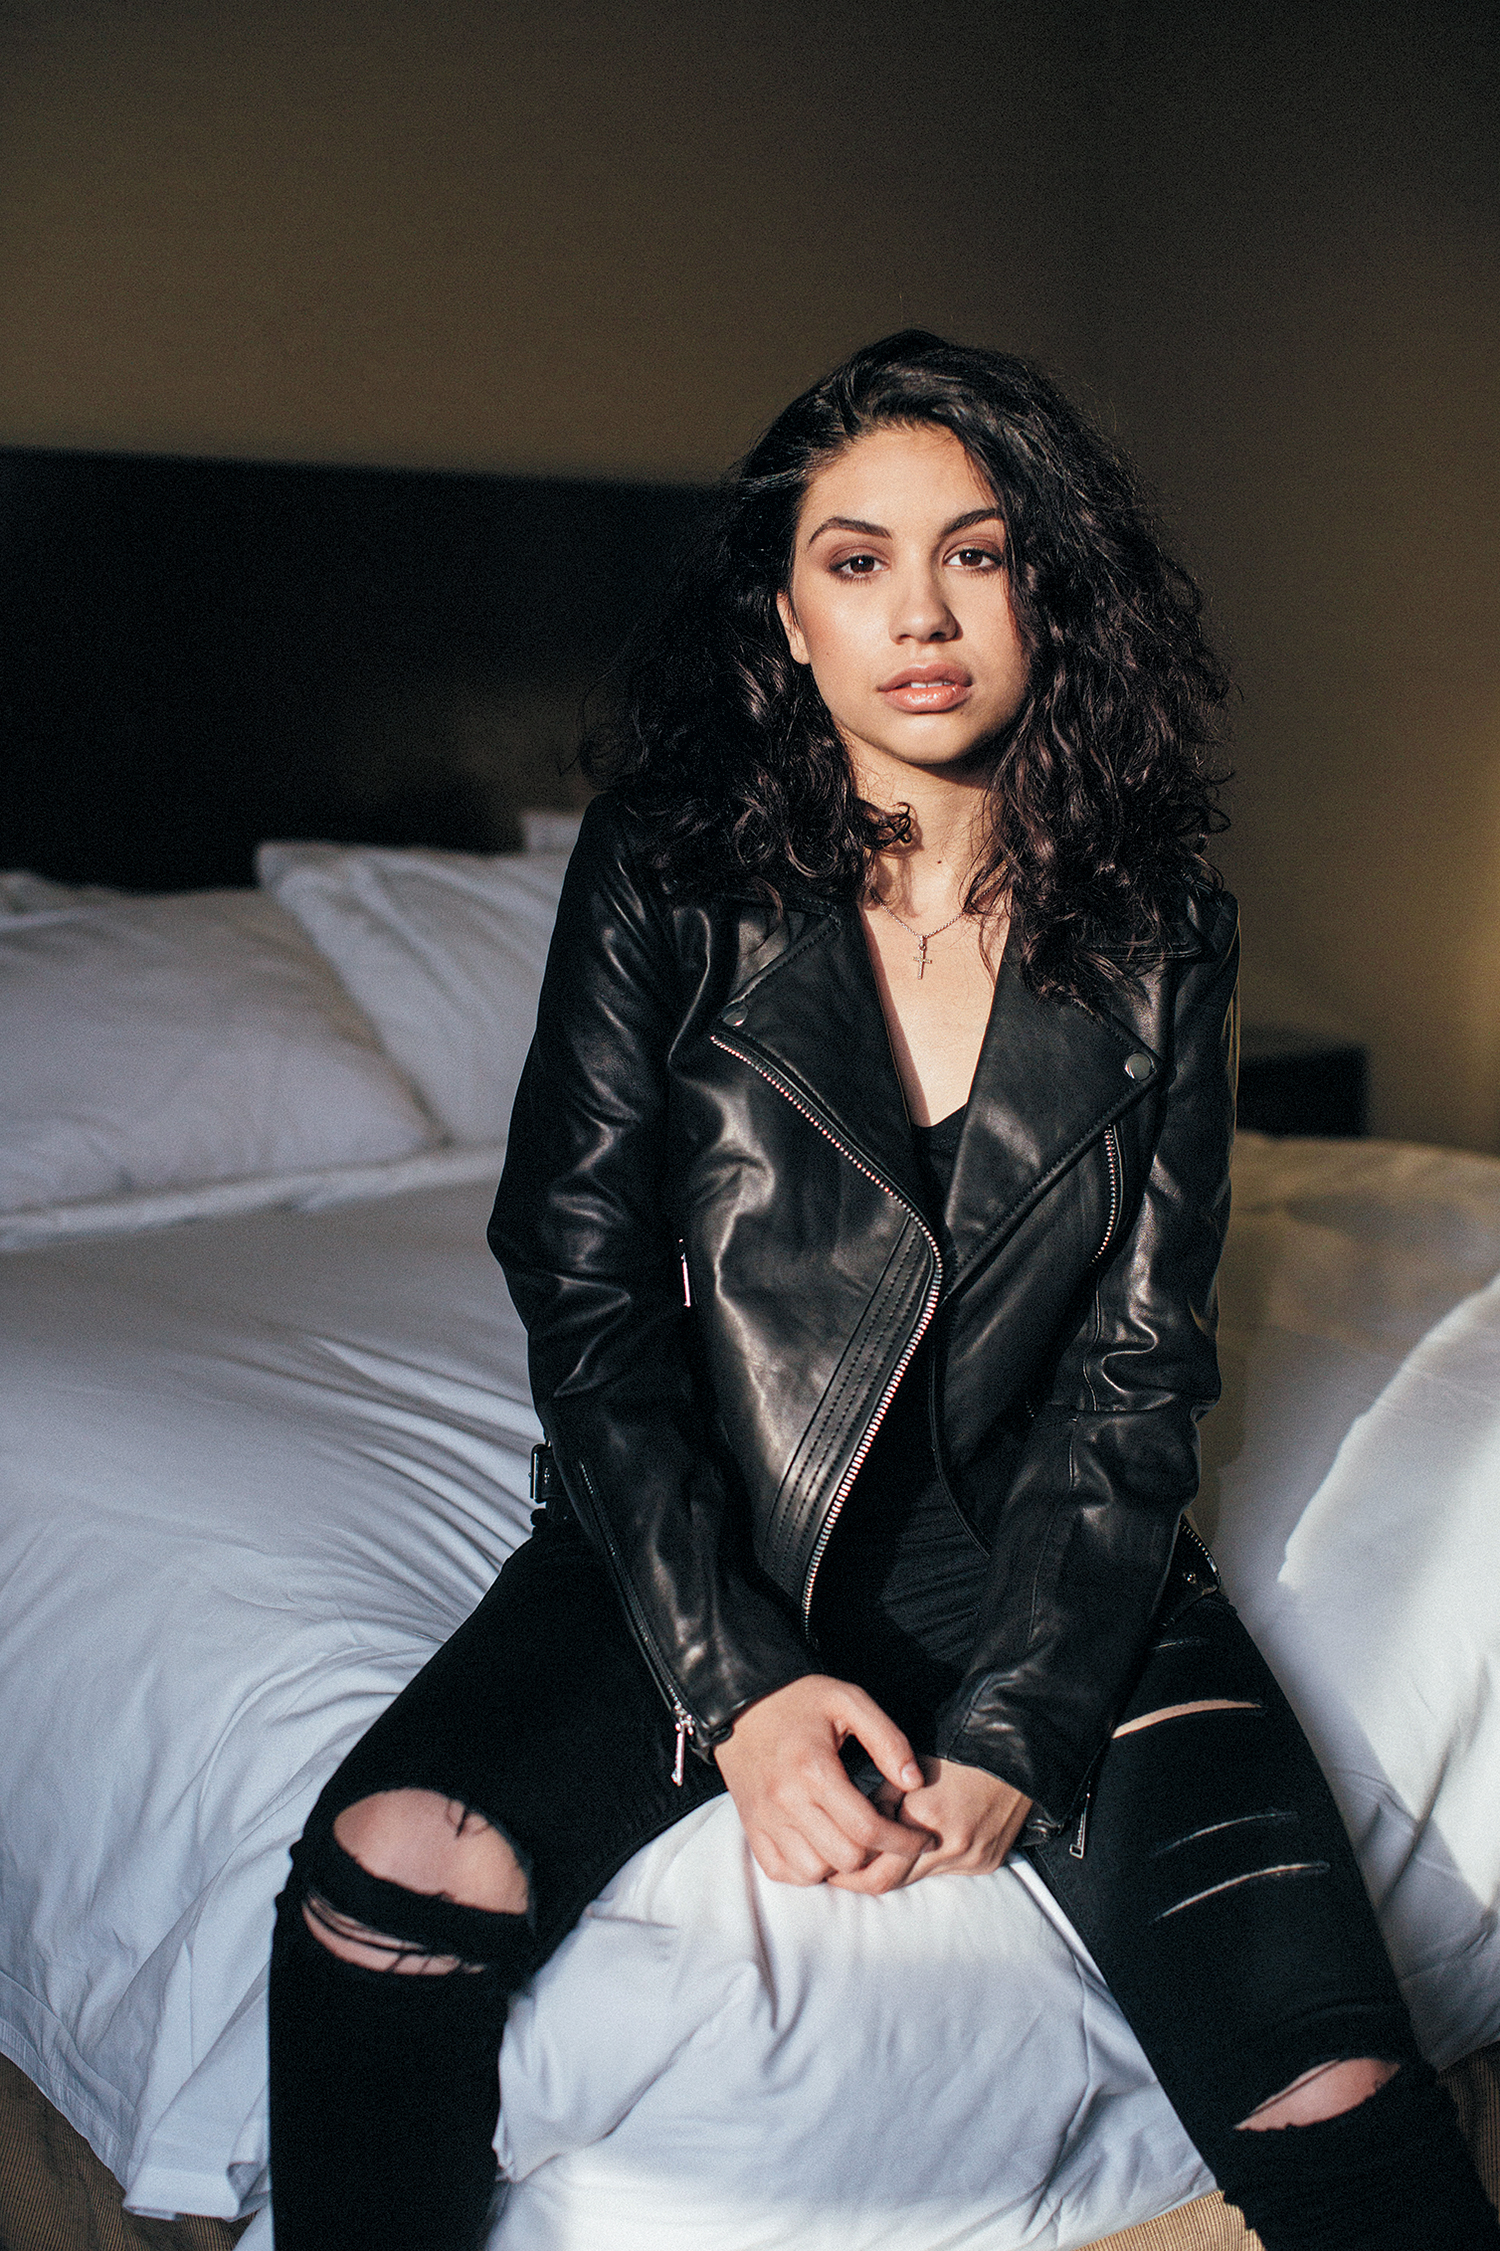 dennis titus recommends alessia cara sexy pic